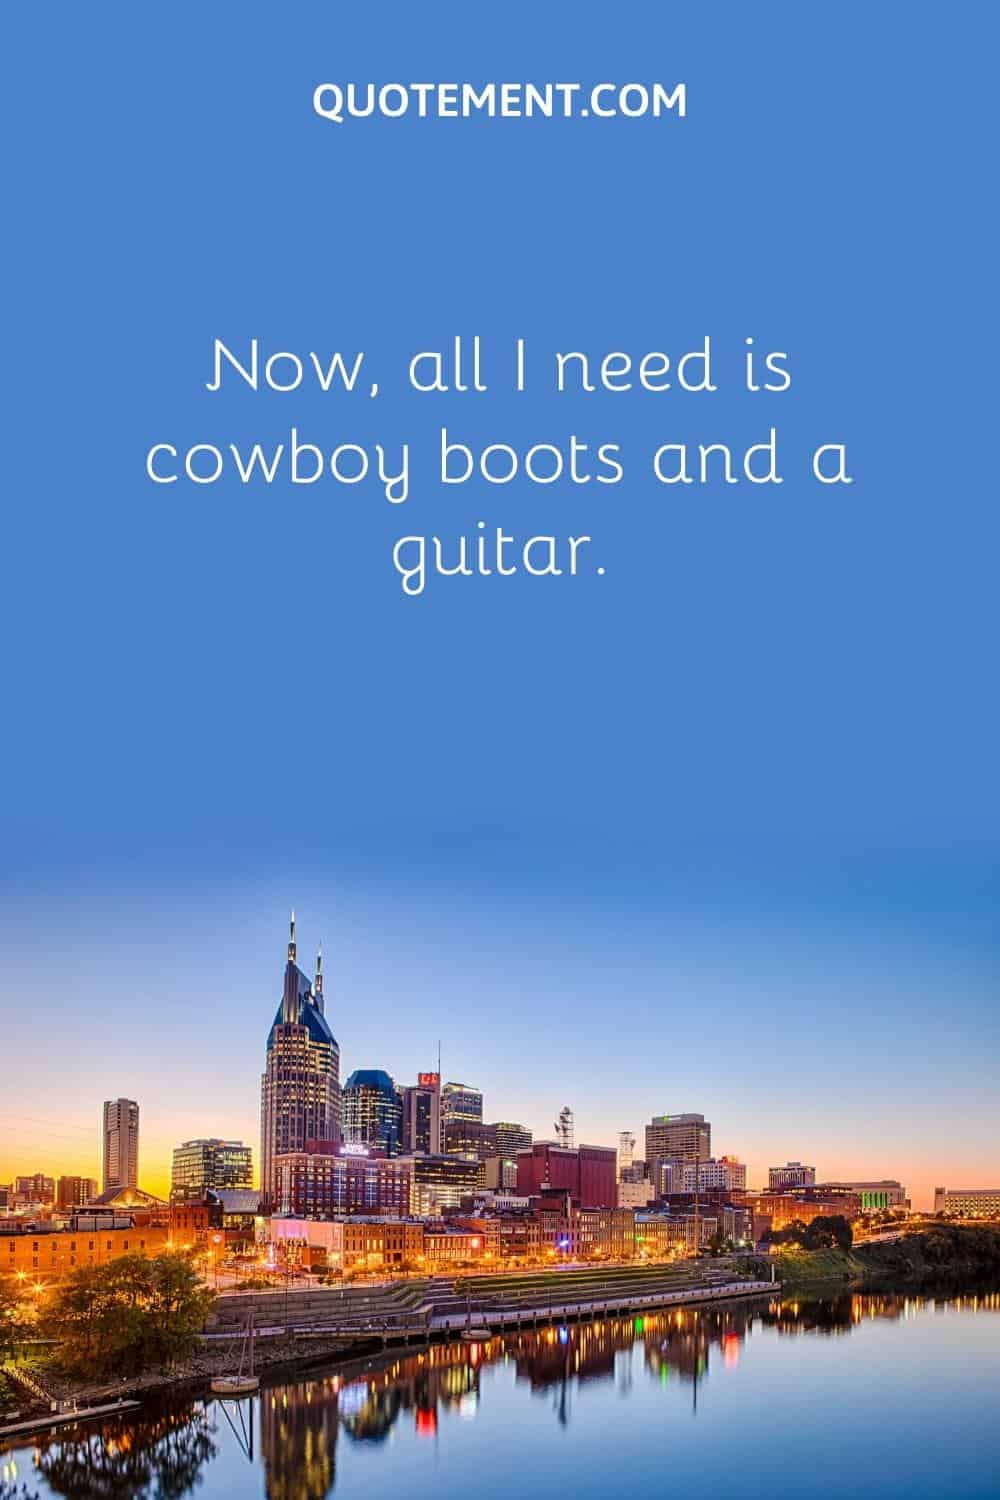 Now, all I need is cowboy boots and a guitar.